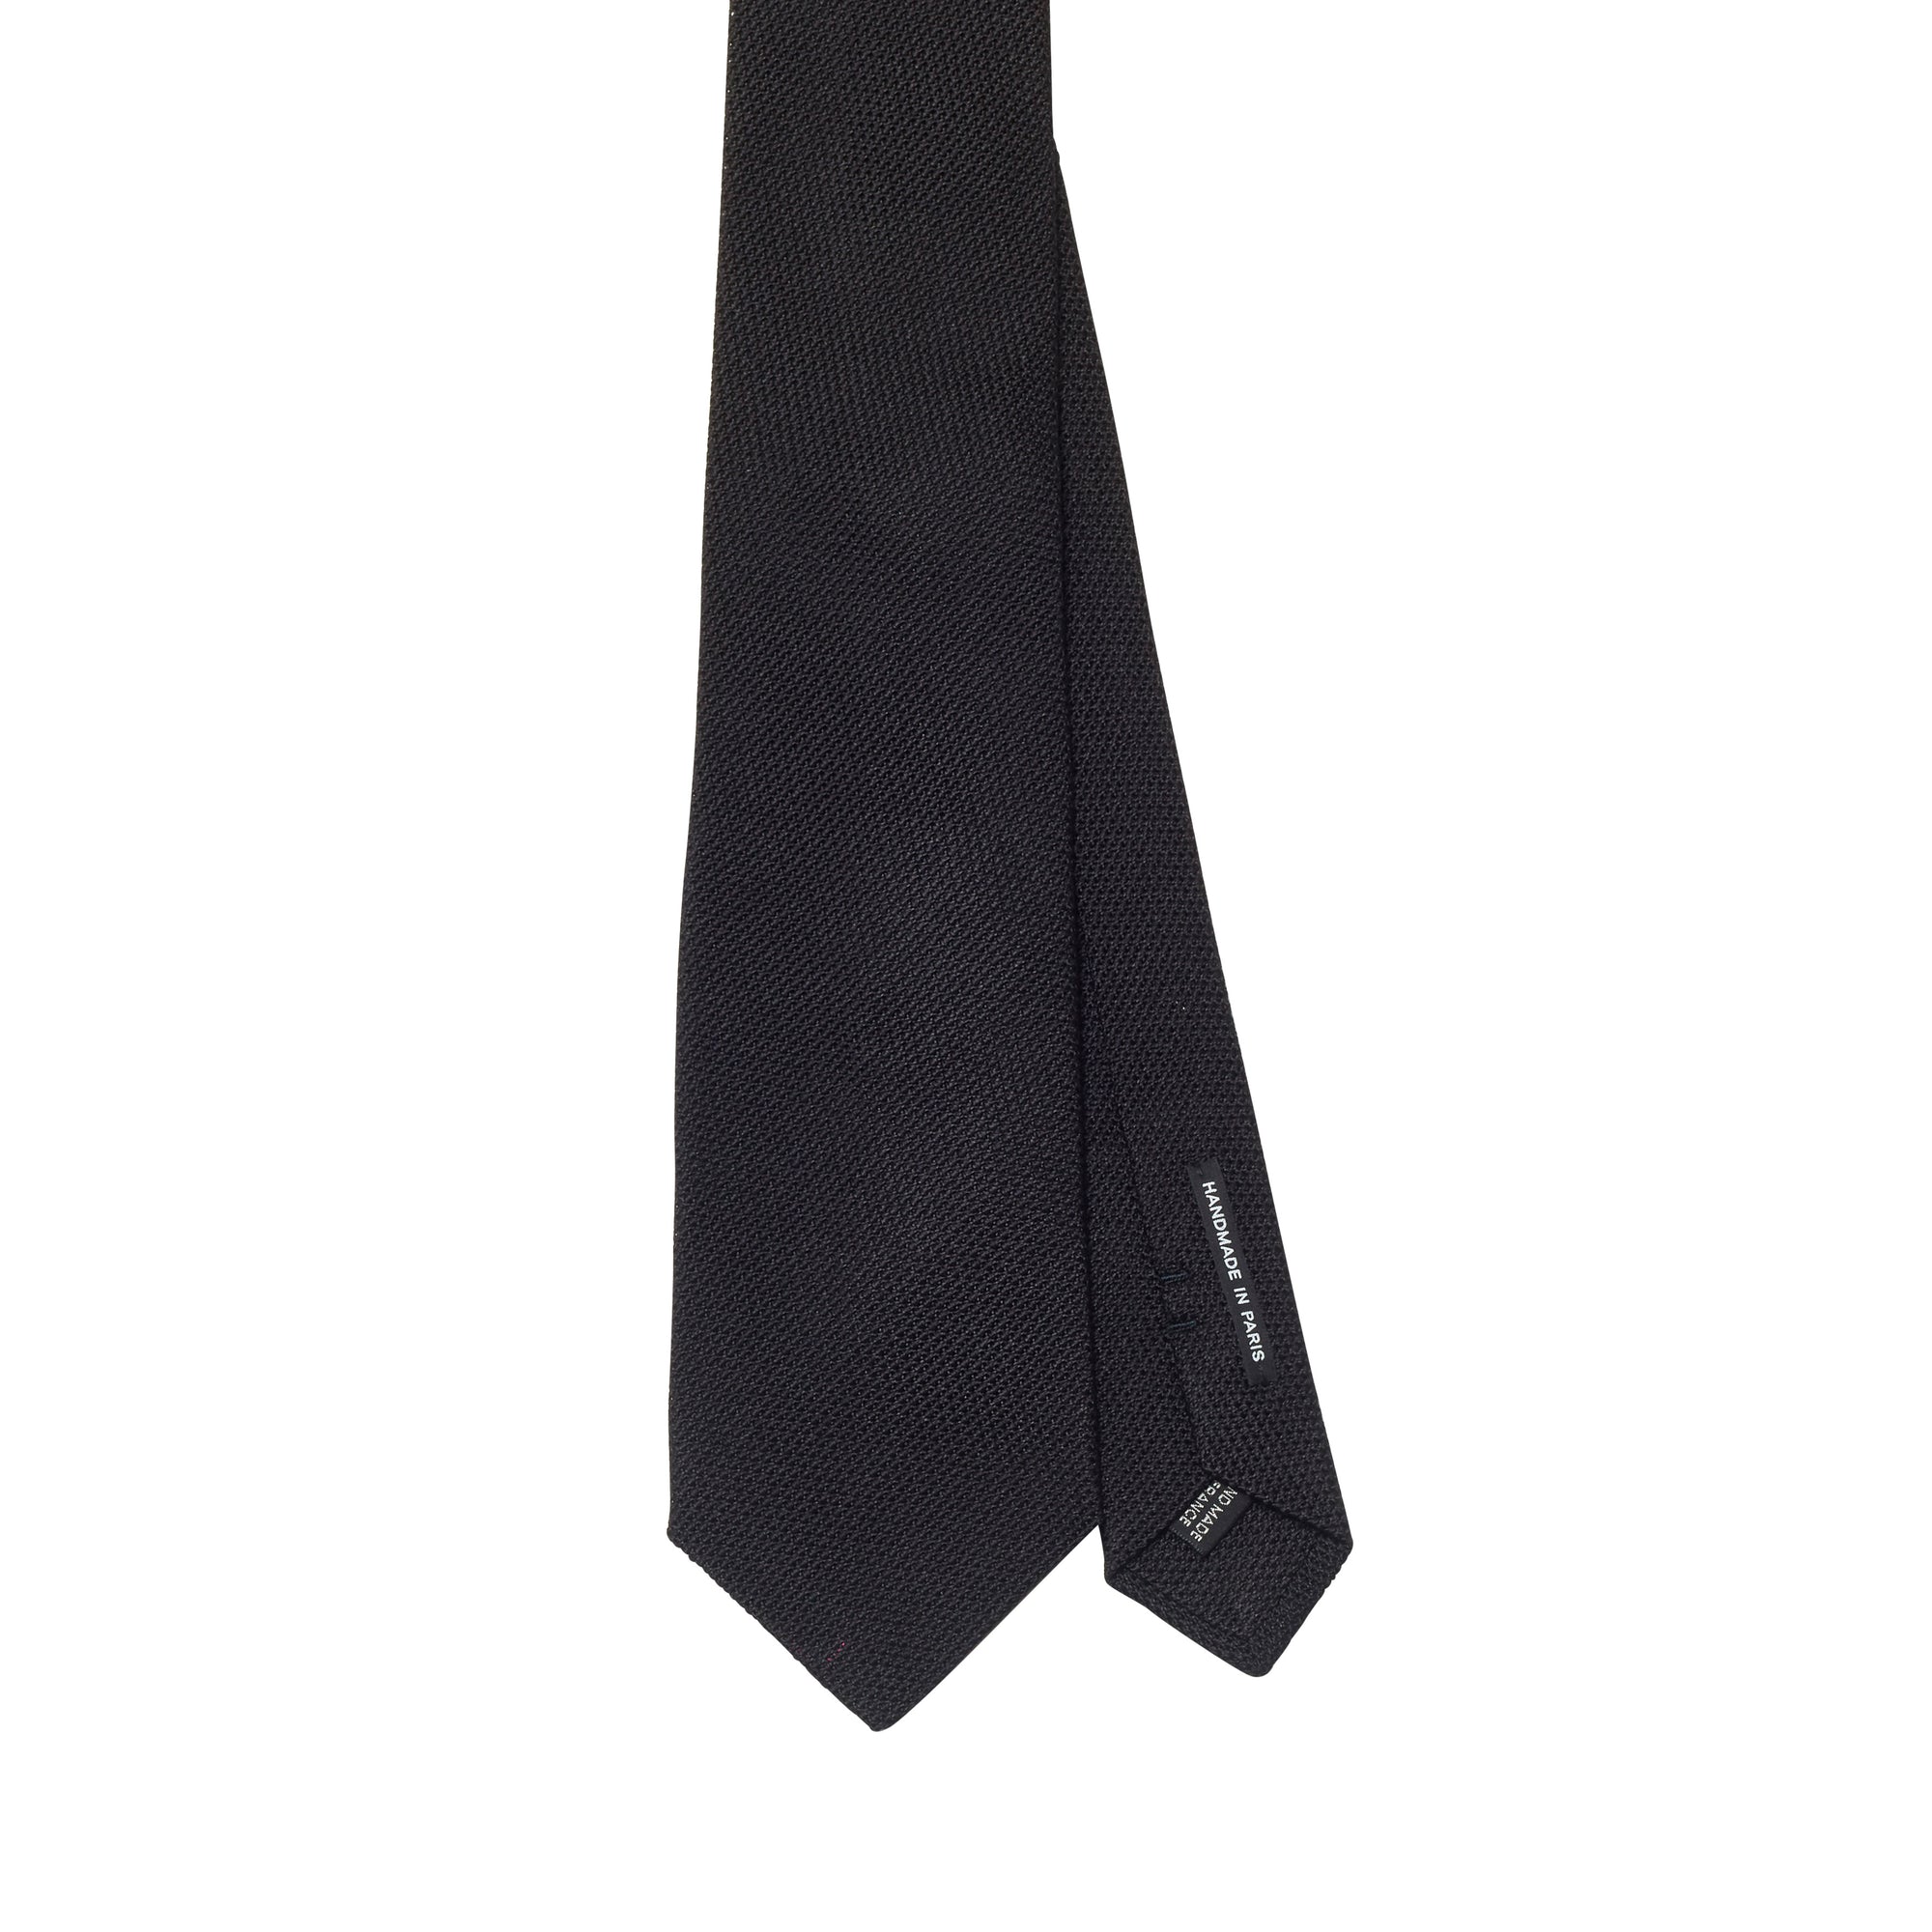 A Sovereign Grade Black Grenadine Fina Tie by KirbyAllison.com on a white background in the United Kingdom.